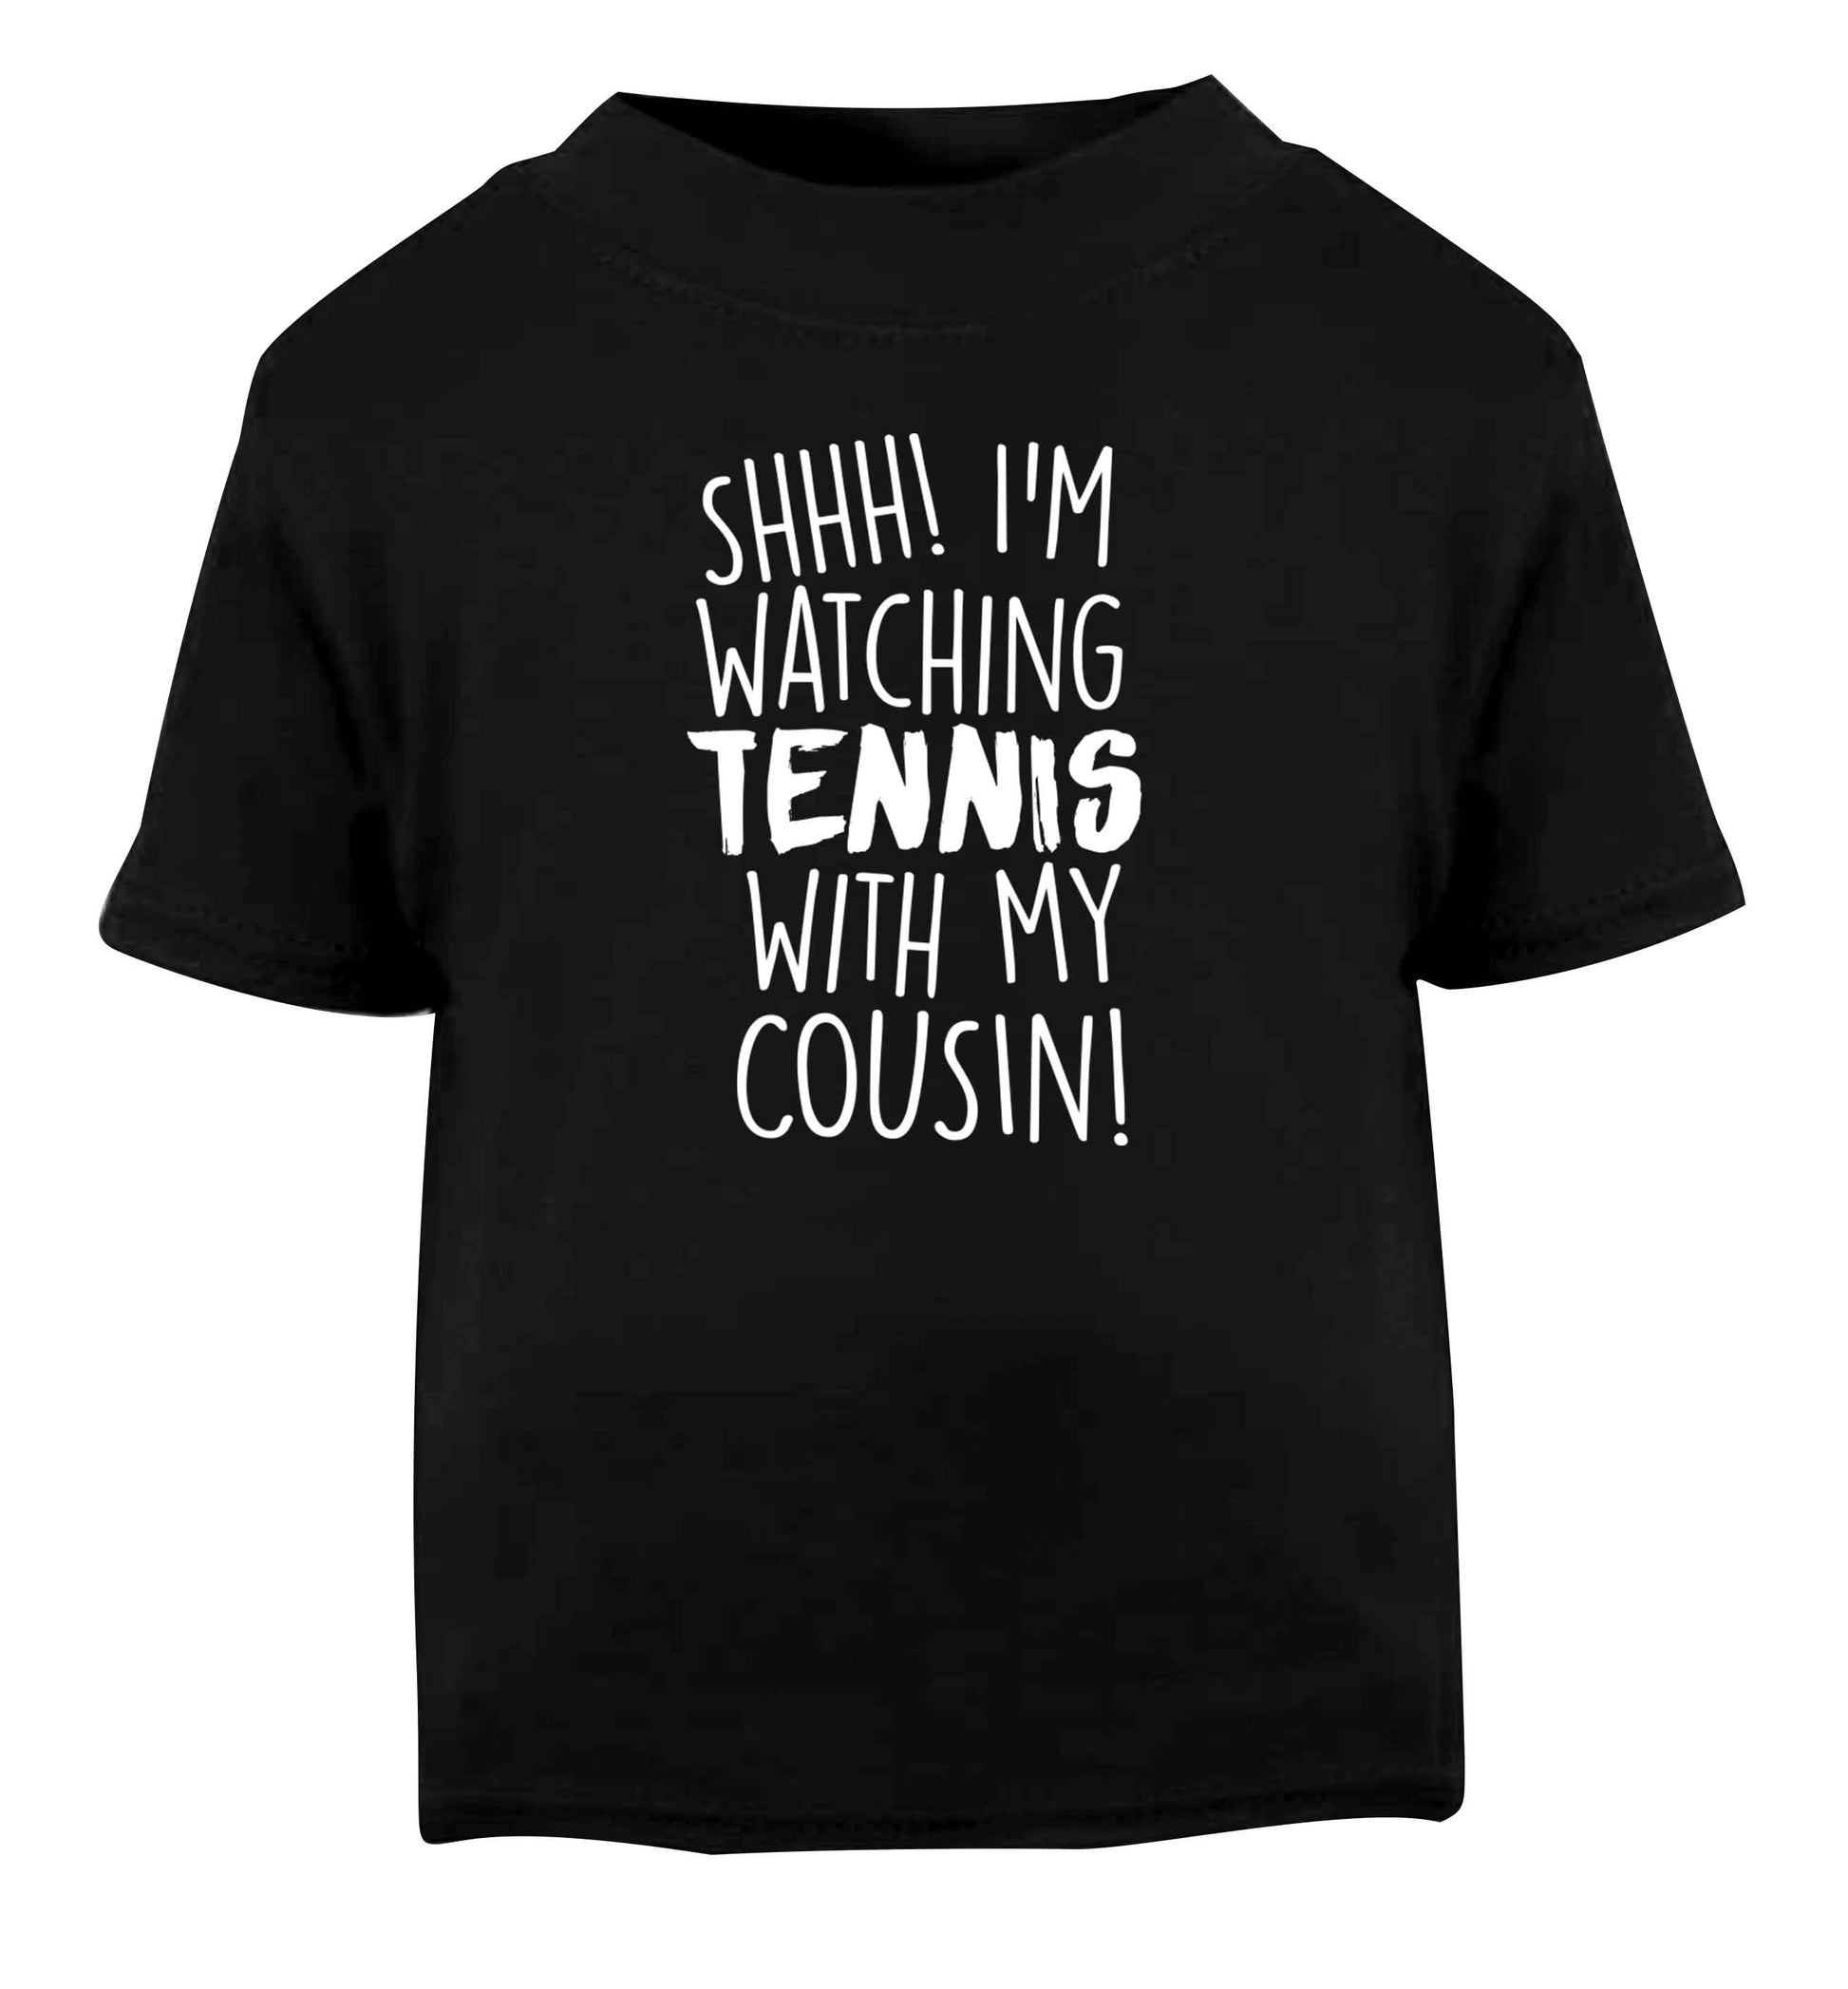 Shh! I'm watching tennis with my cousin! Black Baby Toddler Tshirt 2 years